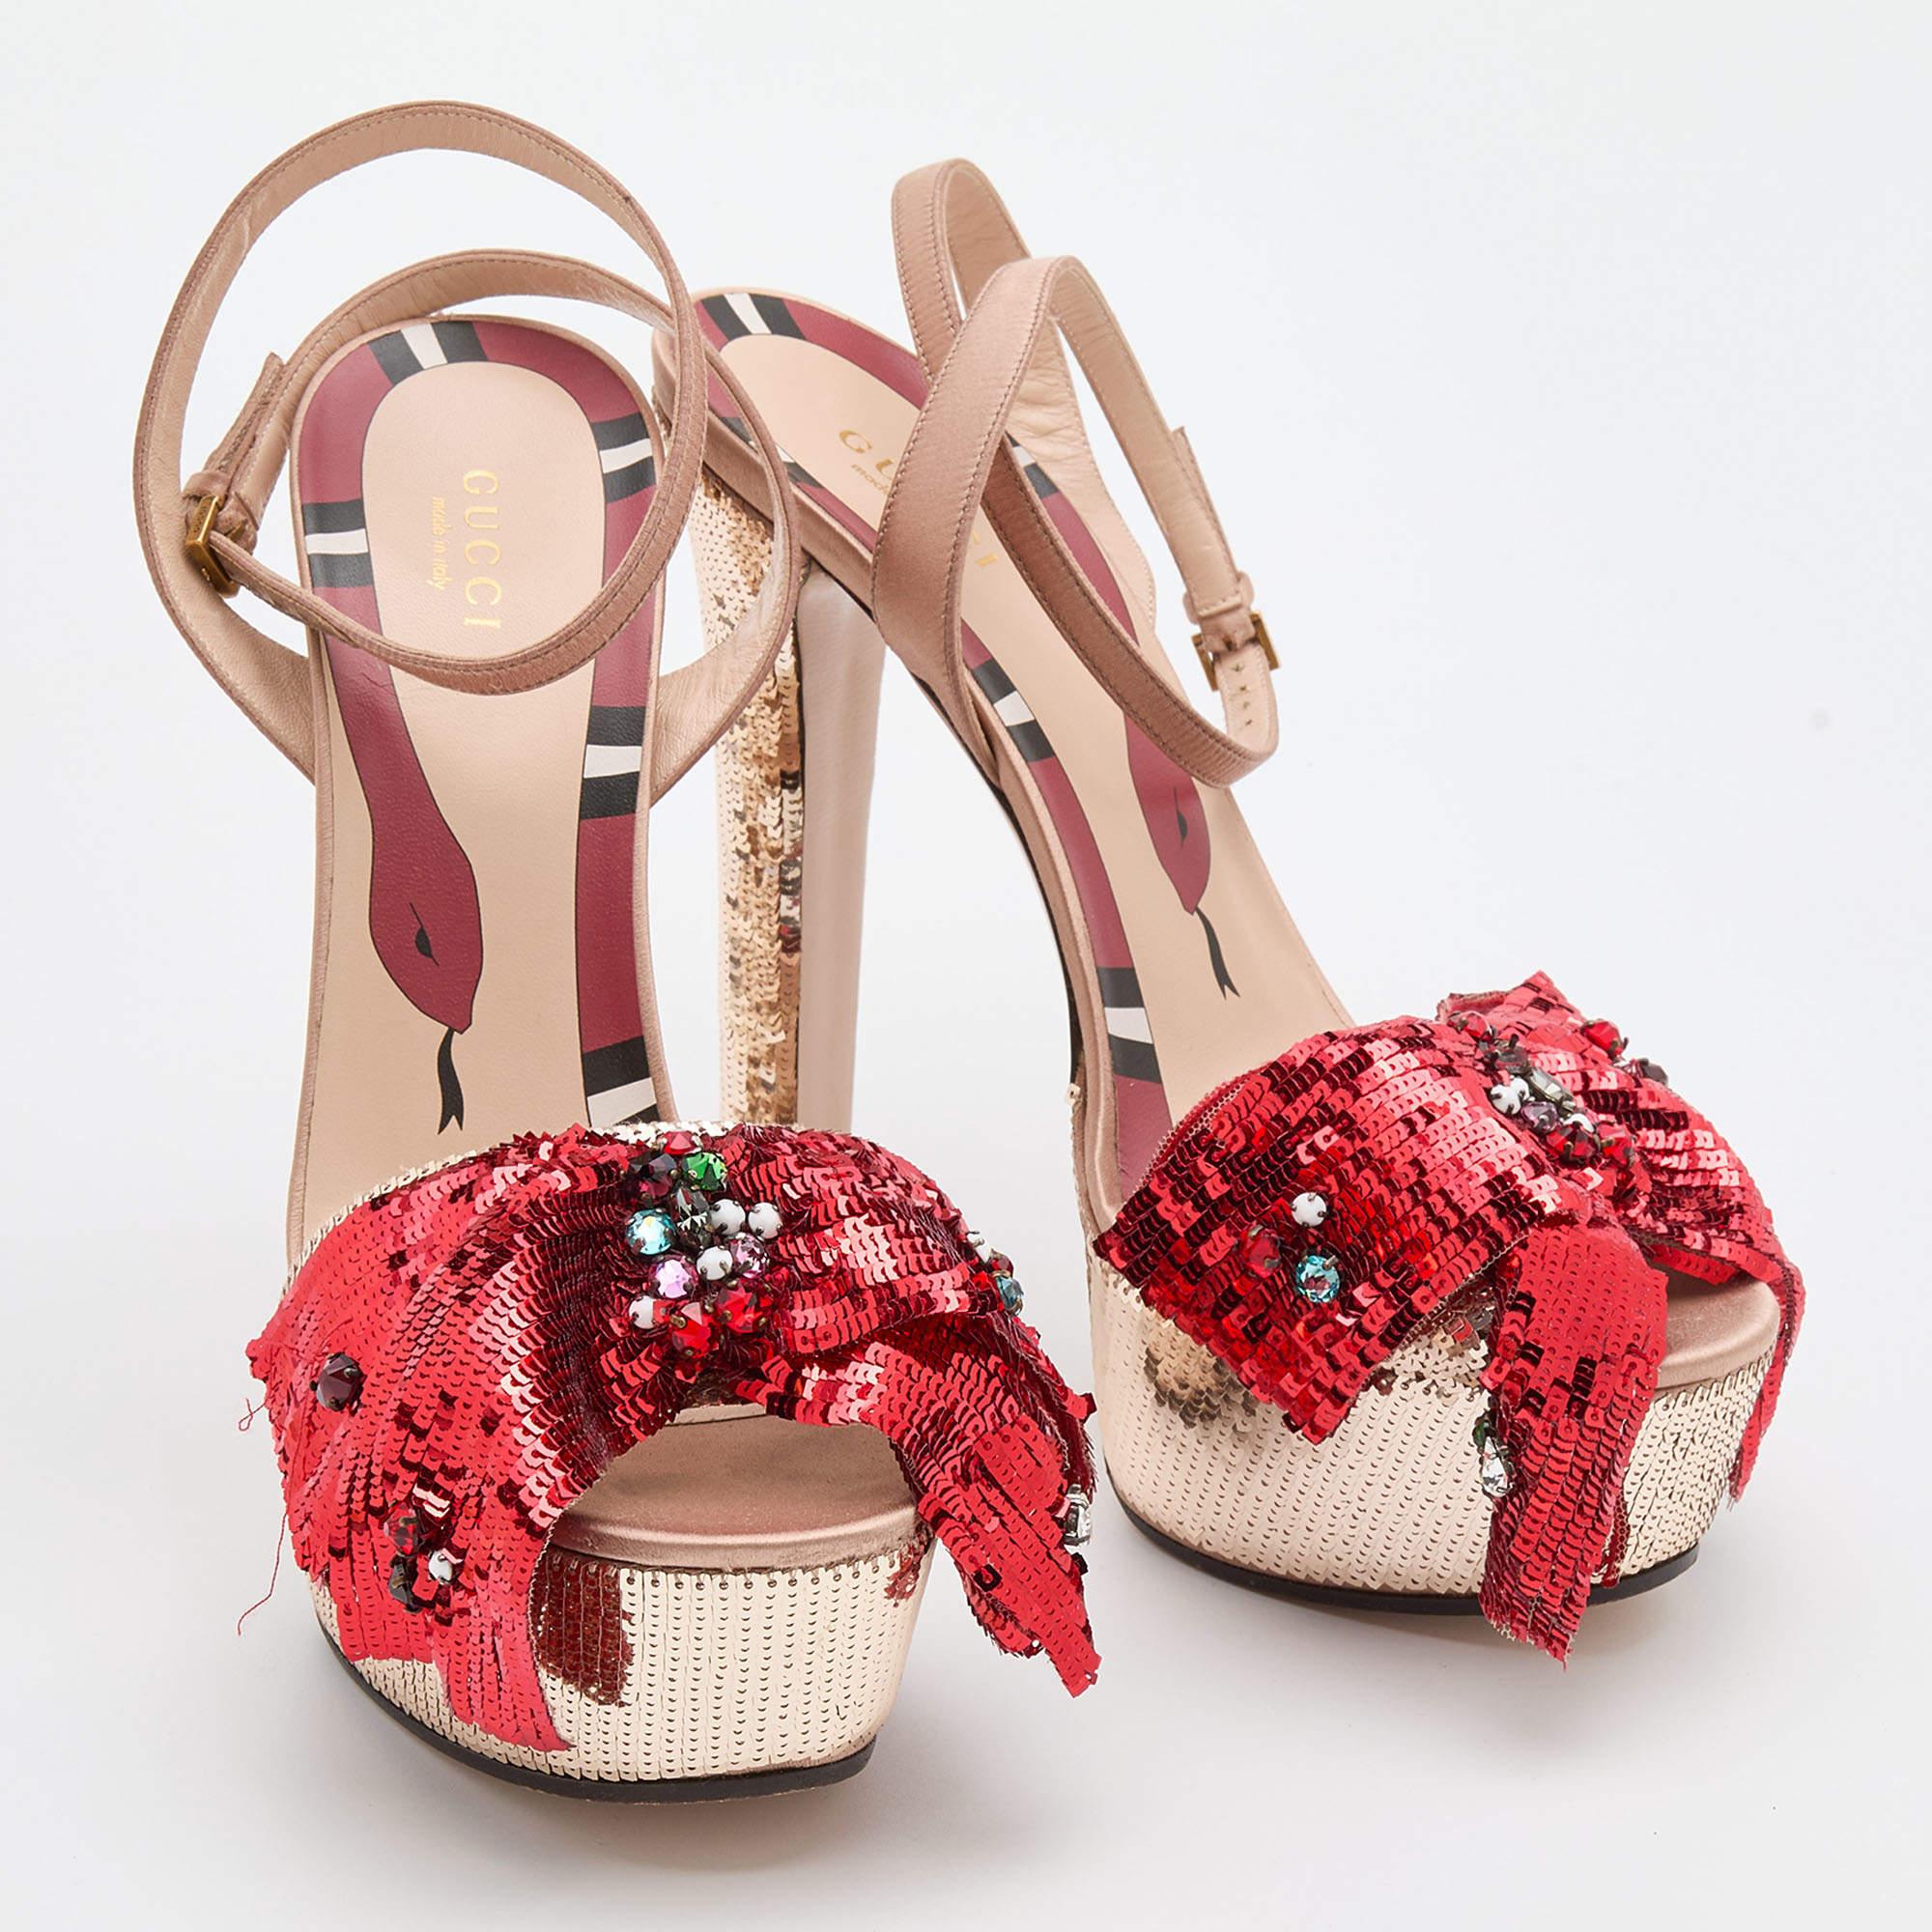 Gucci Beige/Red Sequin and Satin Bow Platform Ankle Strap Sandals Size 38 1